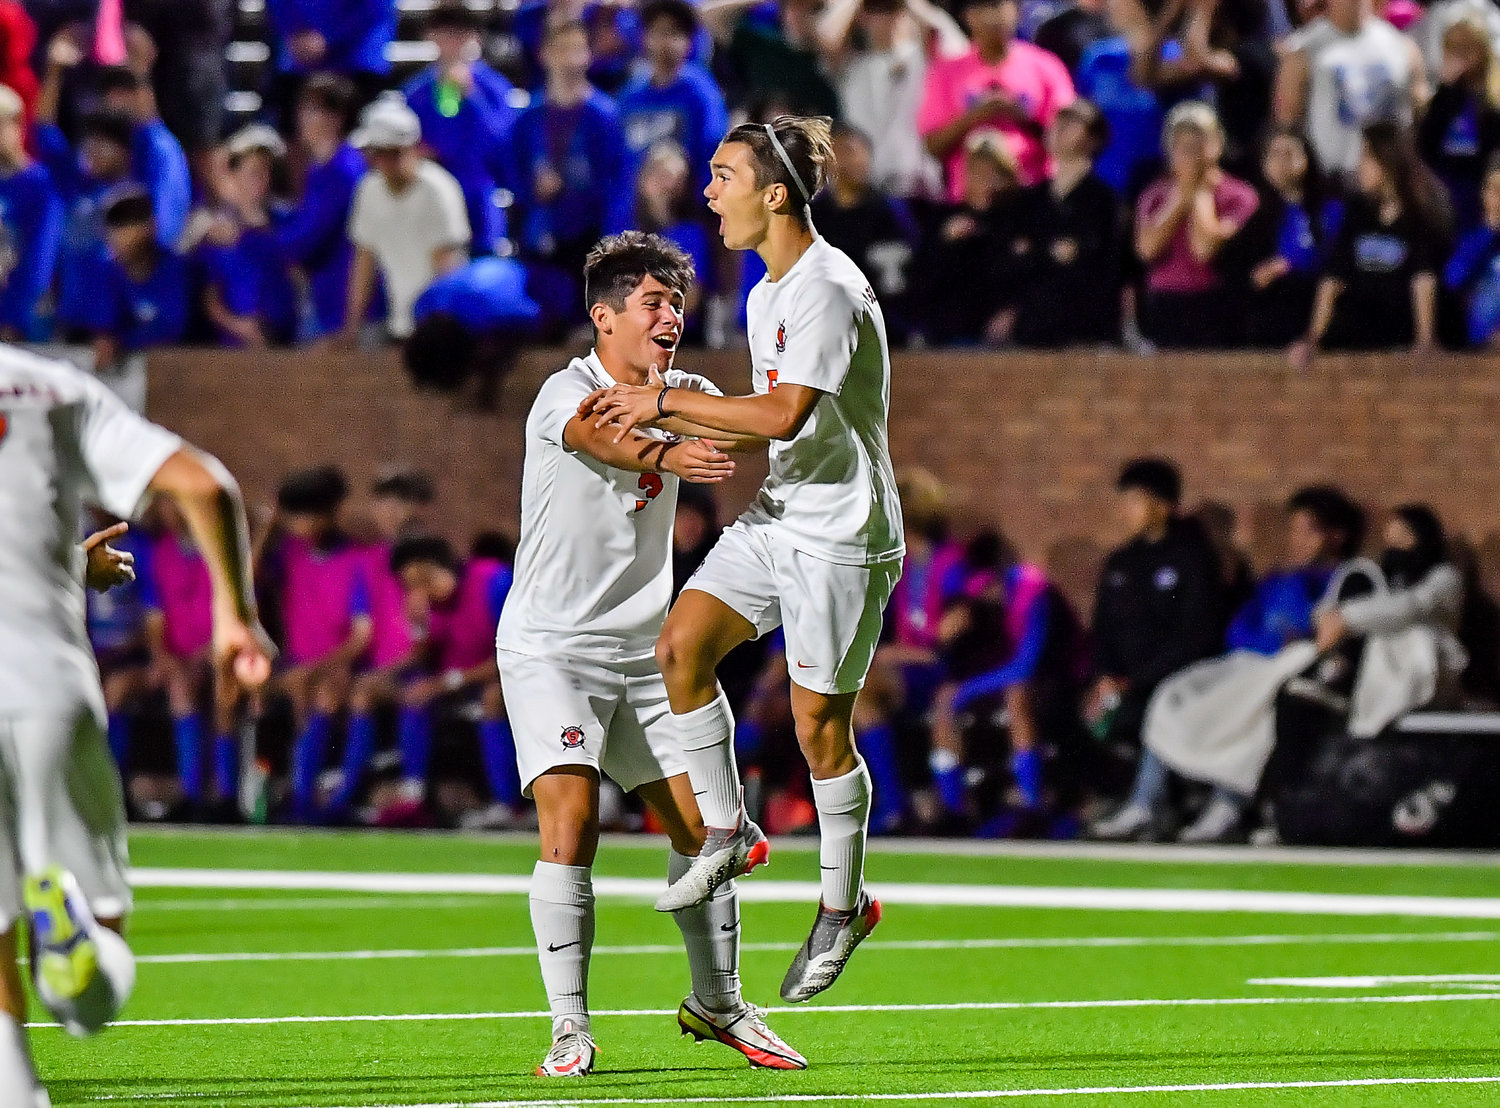 April 1, 2022: Seven Lakes Kortay Koc #6 and Seven Lakes Ty Koc #3 celebrate the score by Koc during Regional Quarterfinal soccer playoff, Seven Lakes vs Katy Taylor at Rhode Stadium. On the block attempt is Katy Taylors Erick Arellano #26 (Photo by Mark Goodman / Katy Times)